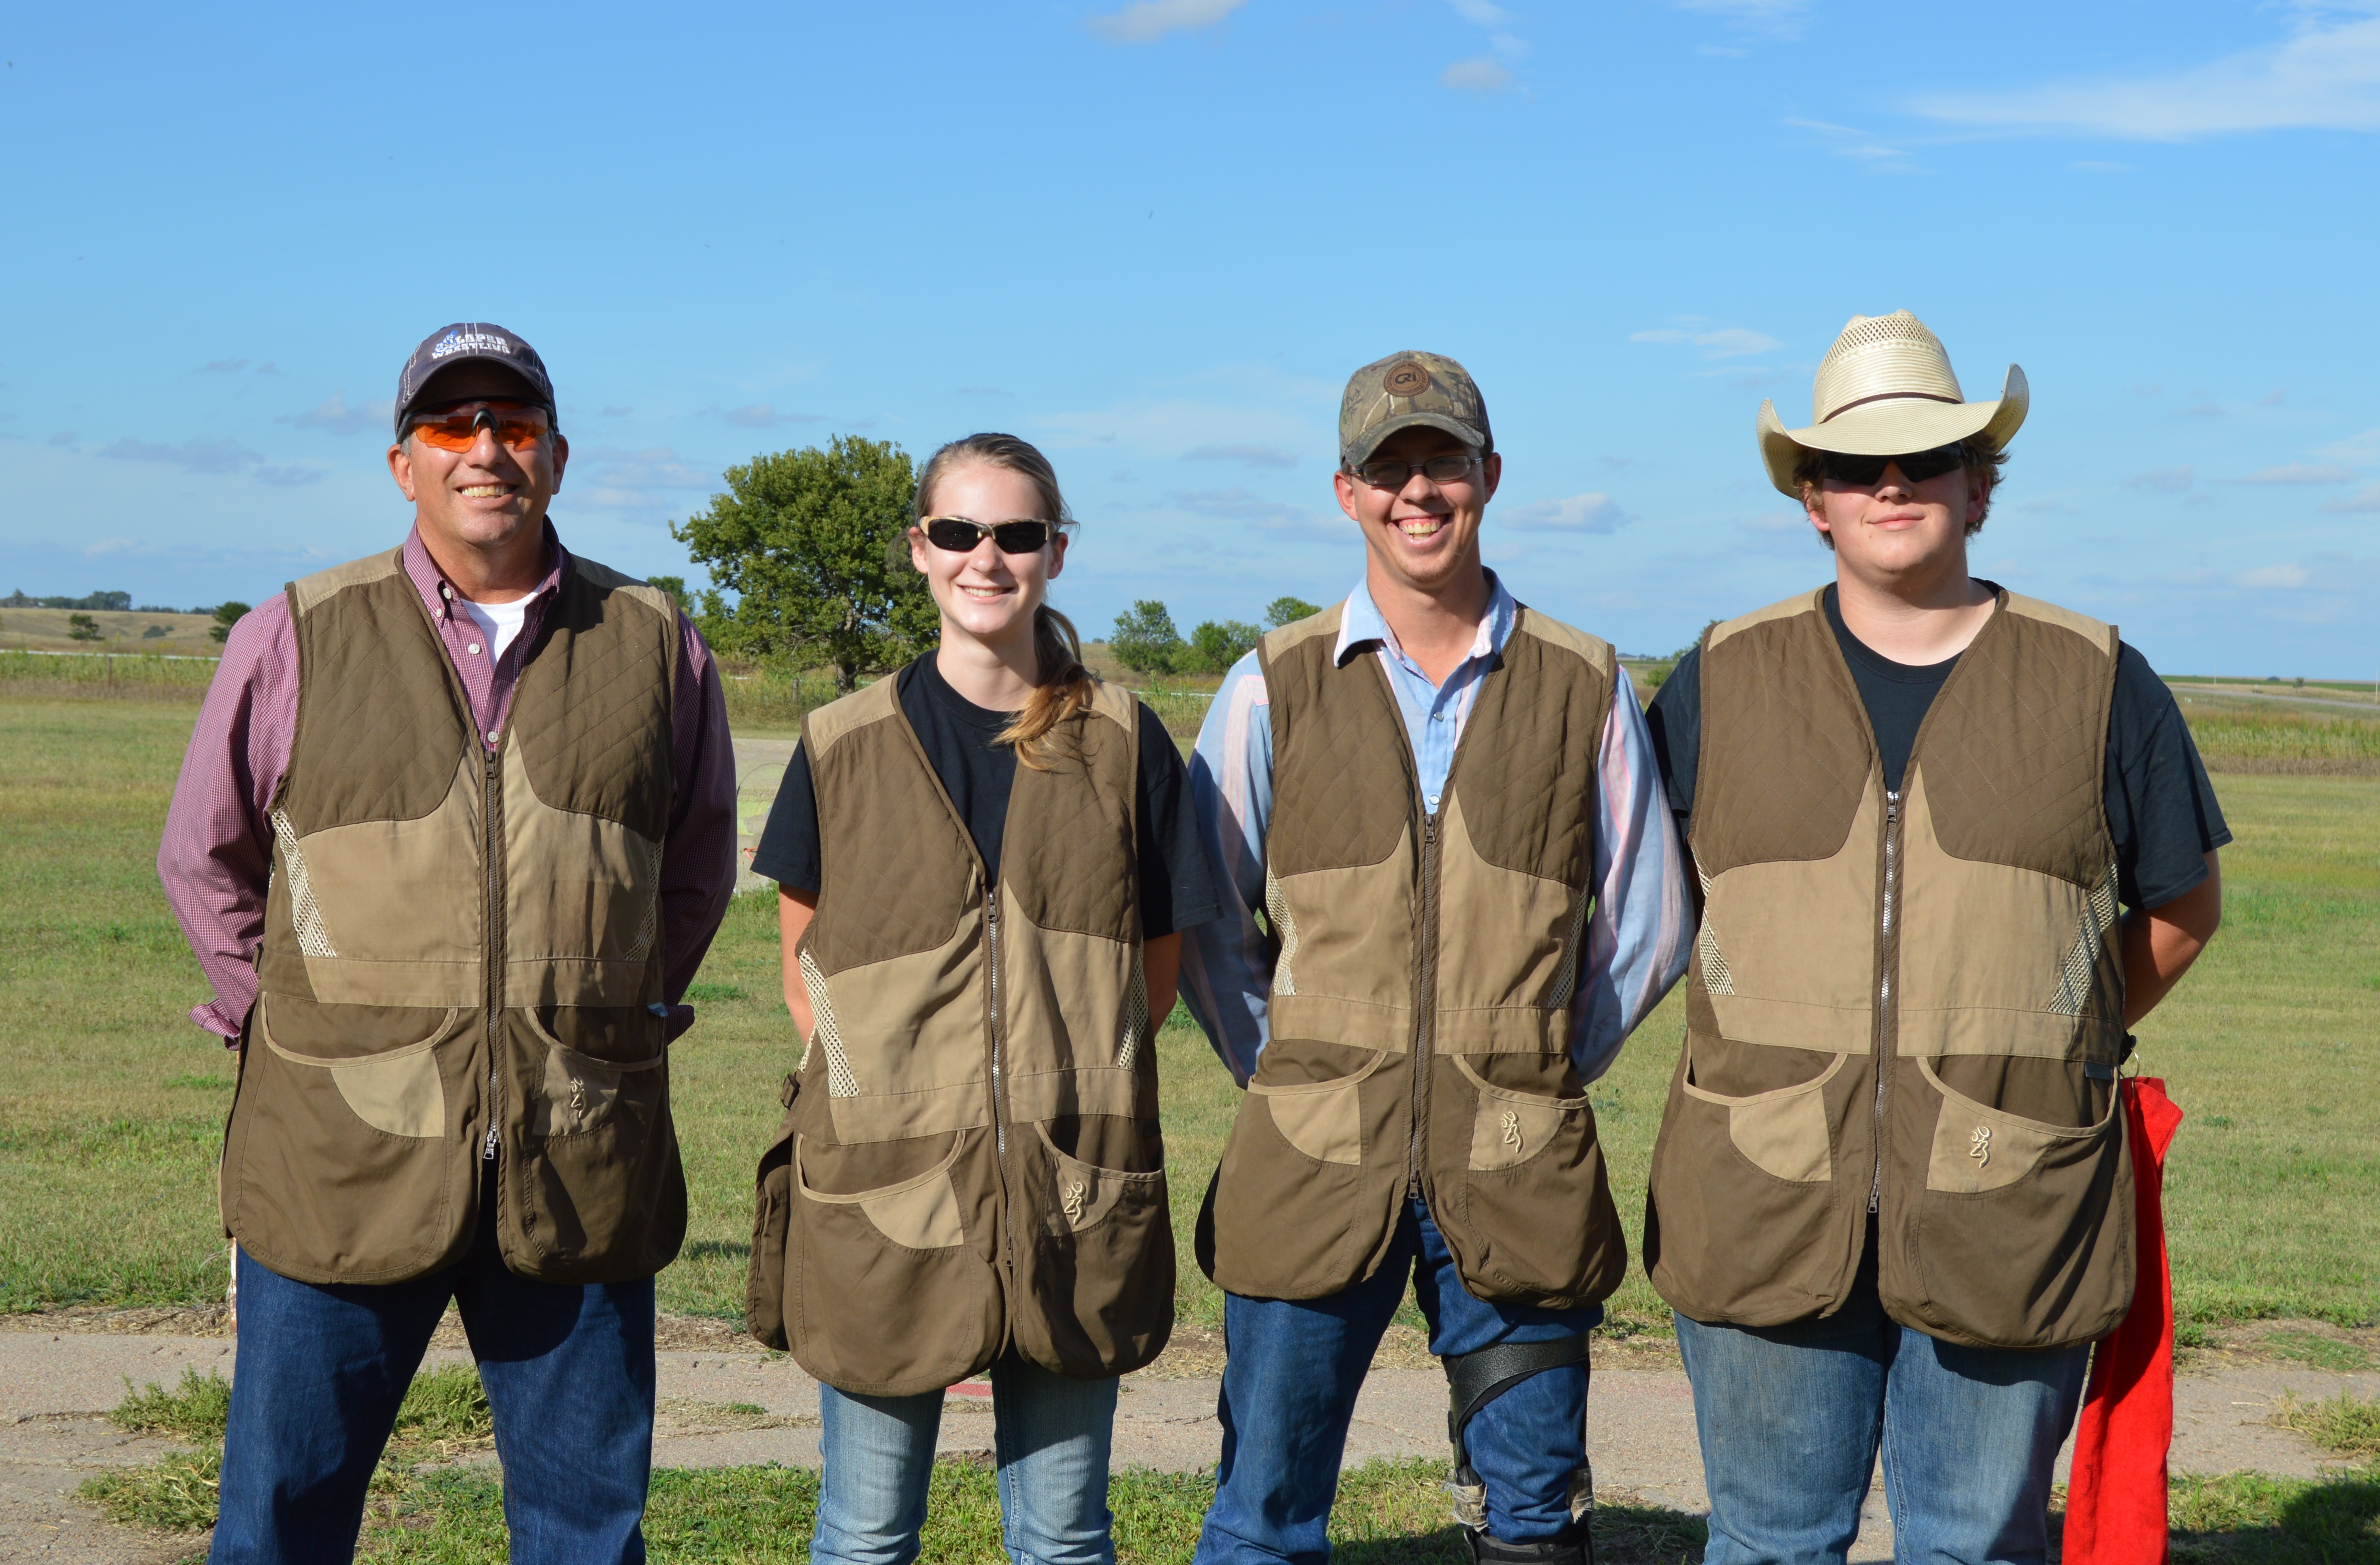 Coach Alan Taylor (far left) with the officers of the NCTA Aggie Trap Club include, Rilee VanDonge, Holton, Kan., president; Stetson Youel, Hay Springs, treasurer; and Trevor Kuhn, Omaha, vice president. (C.Tilford/NCTA News photo)